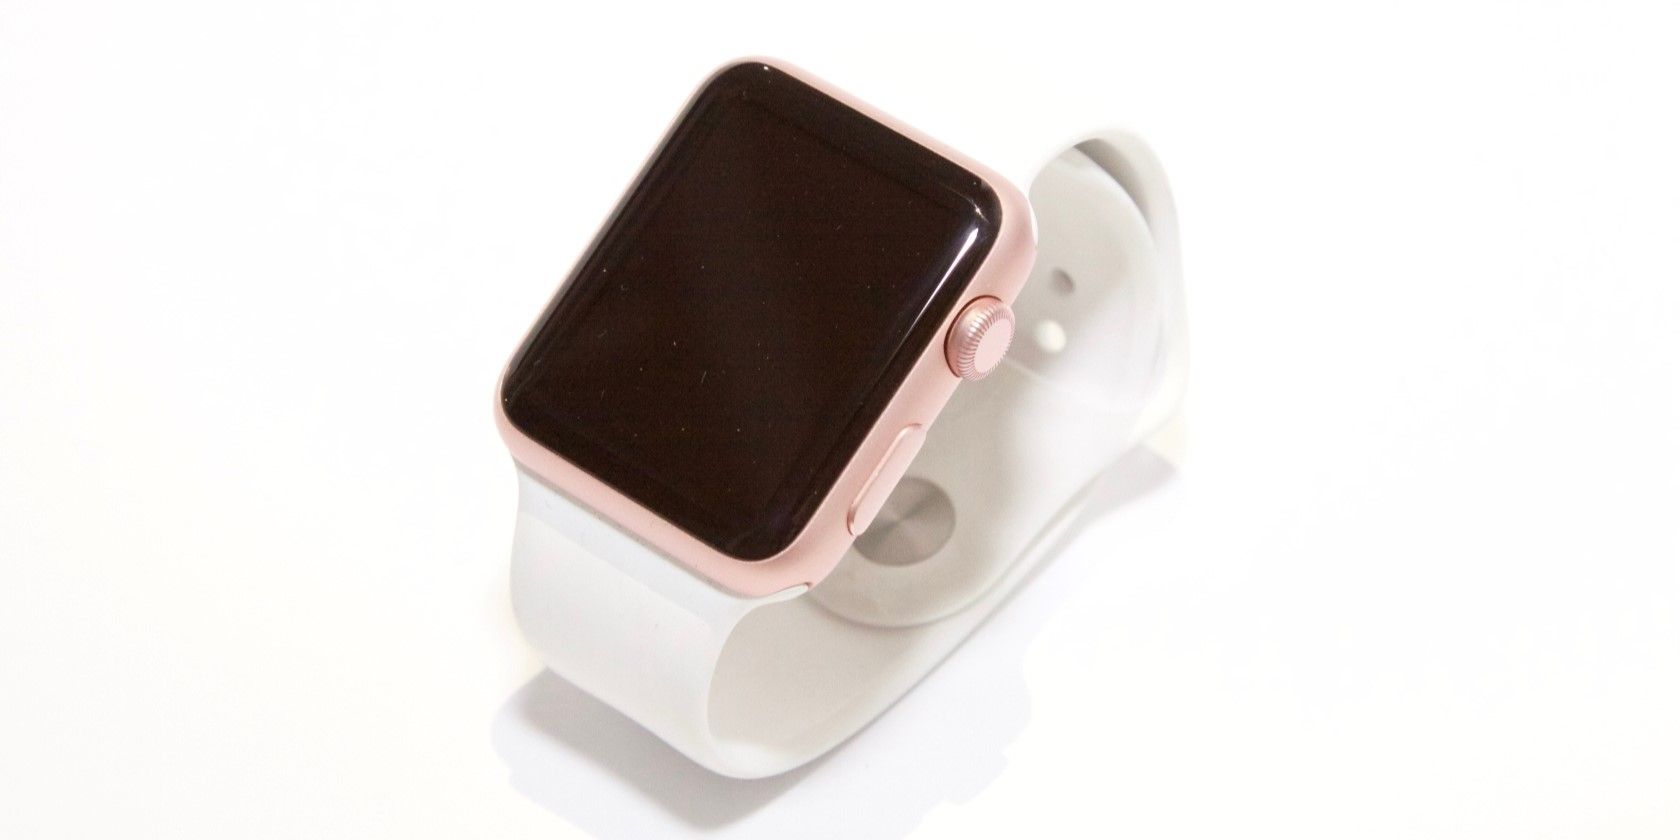 Picture of Apple Watch on white background